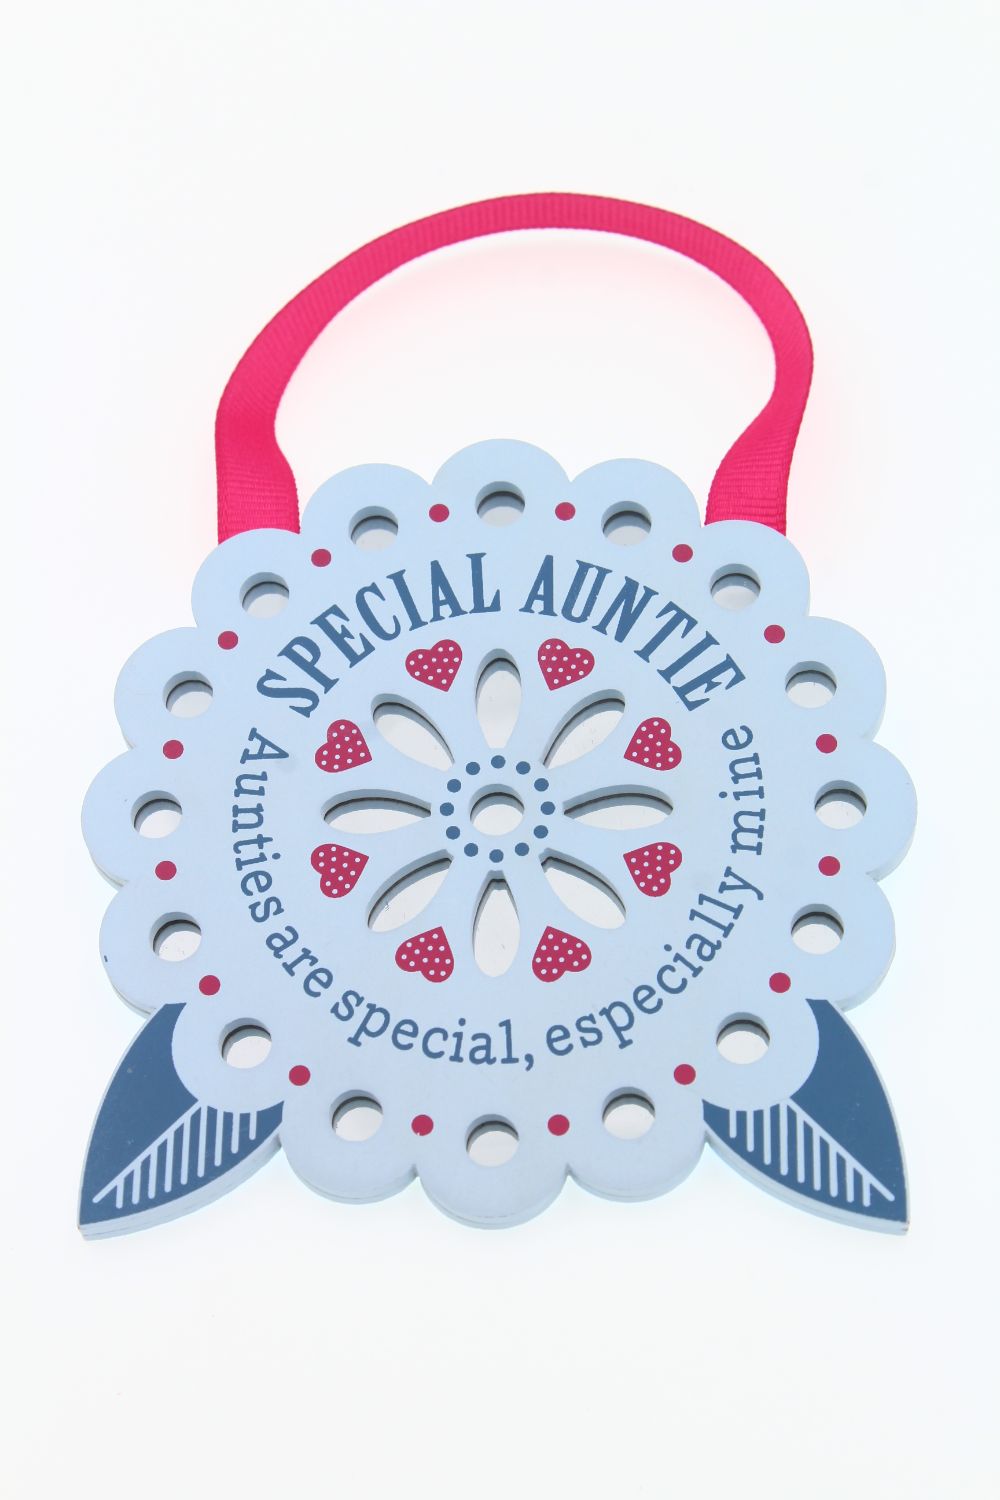 Special Auntie Reflective Words Hanging Plaque With Ribbon